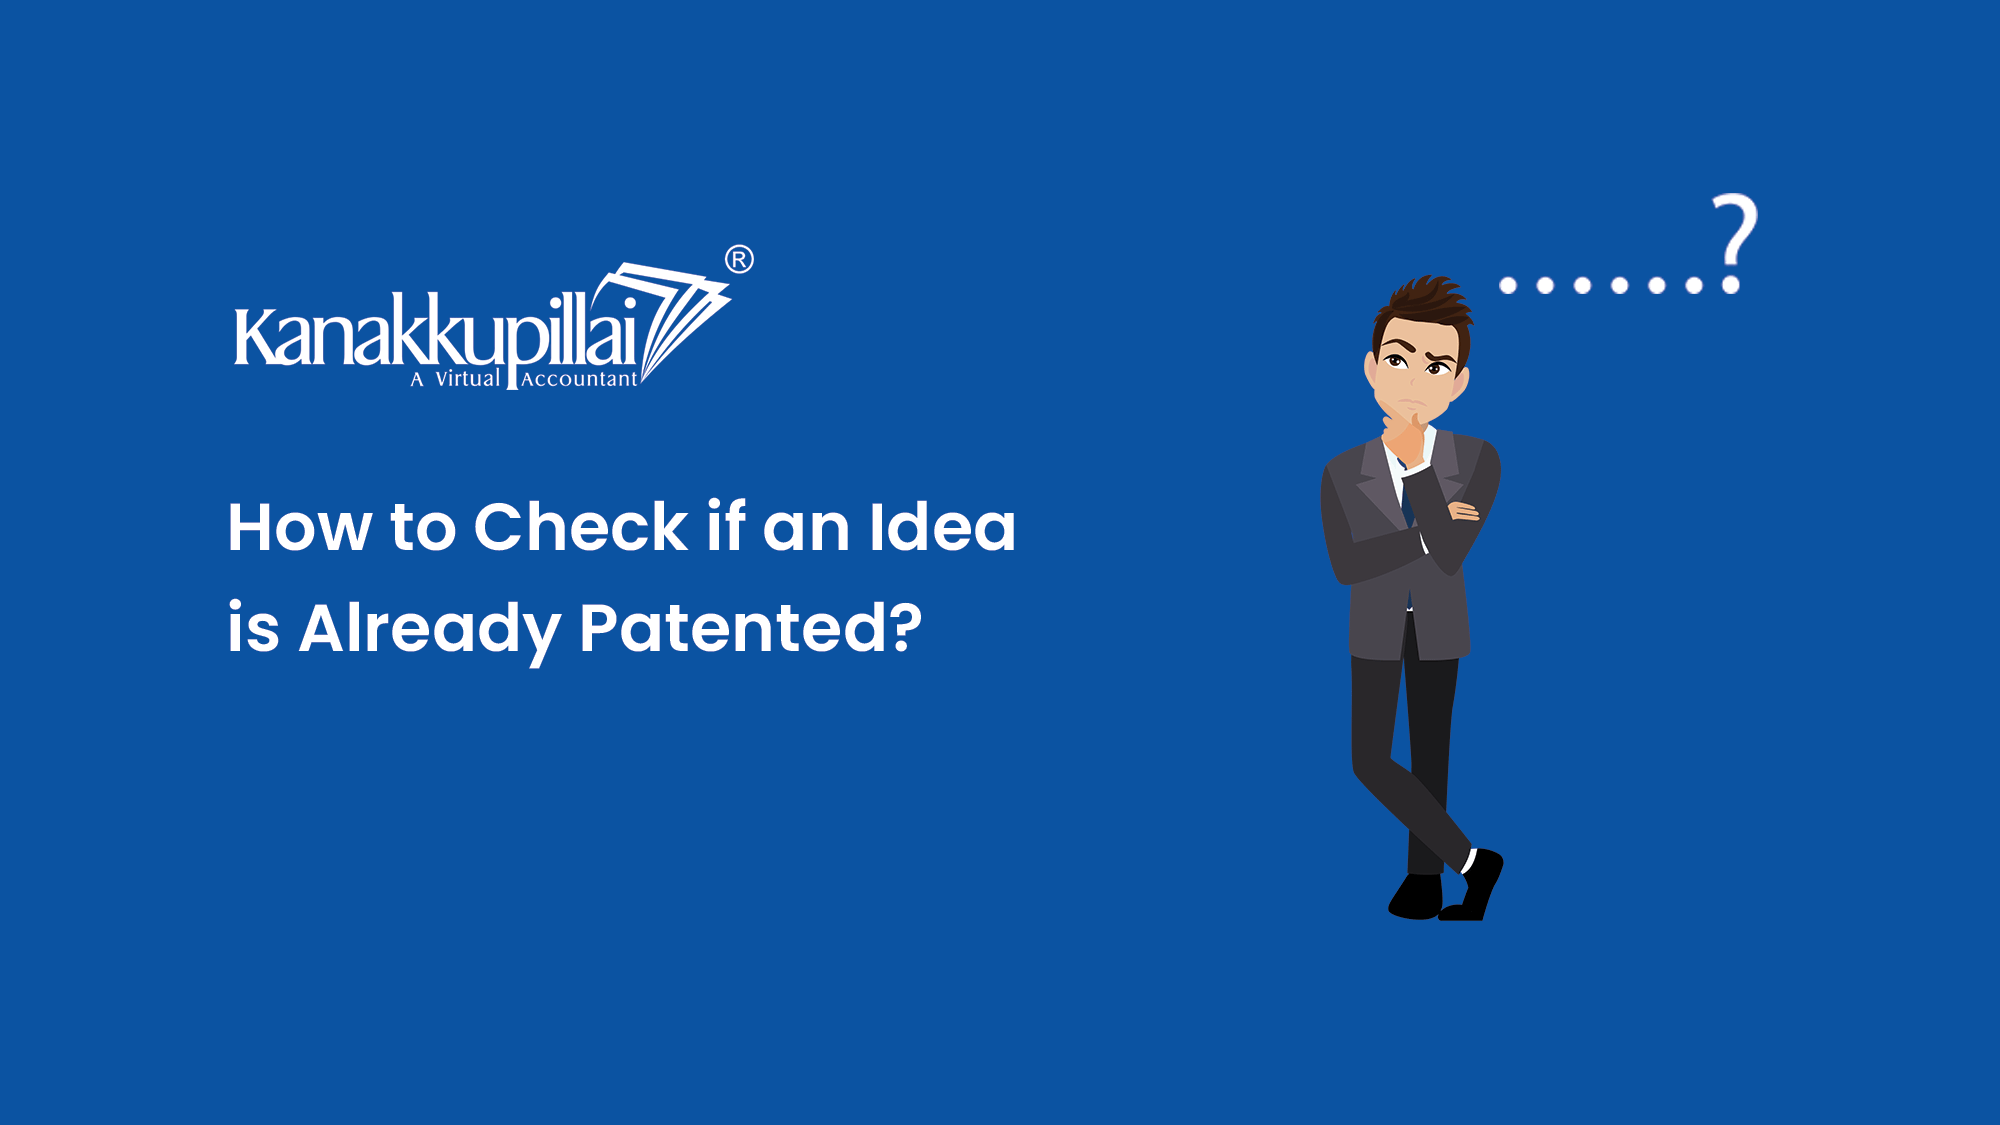 How to Check if an Idea is Already Patented?